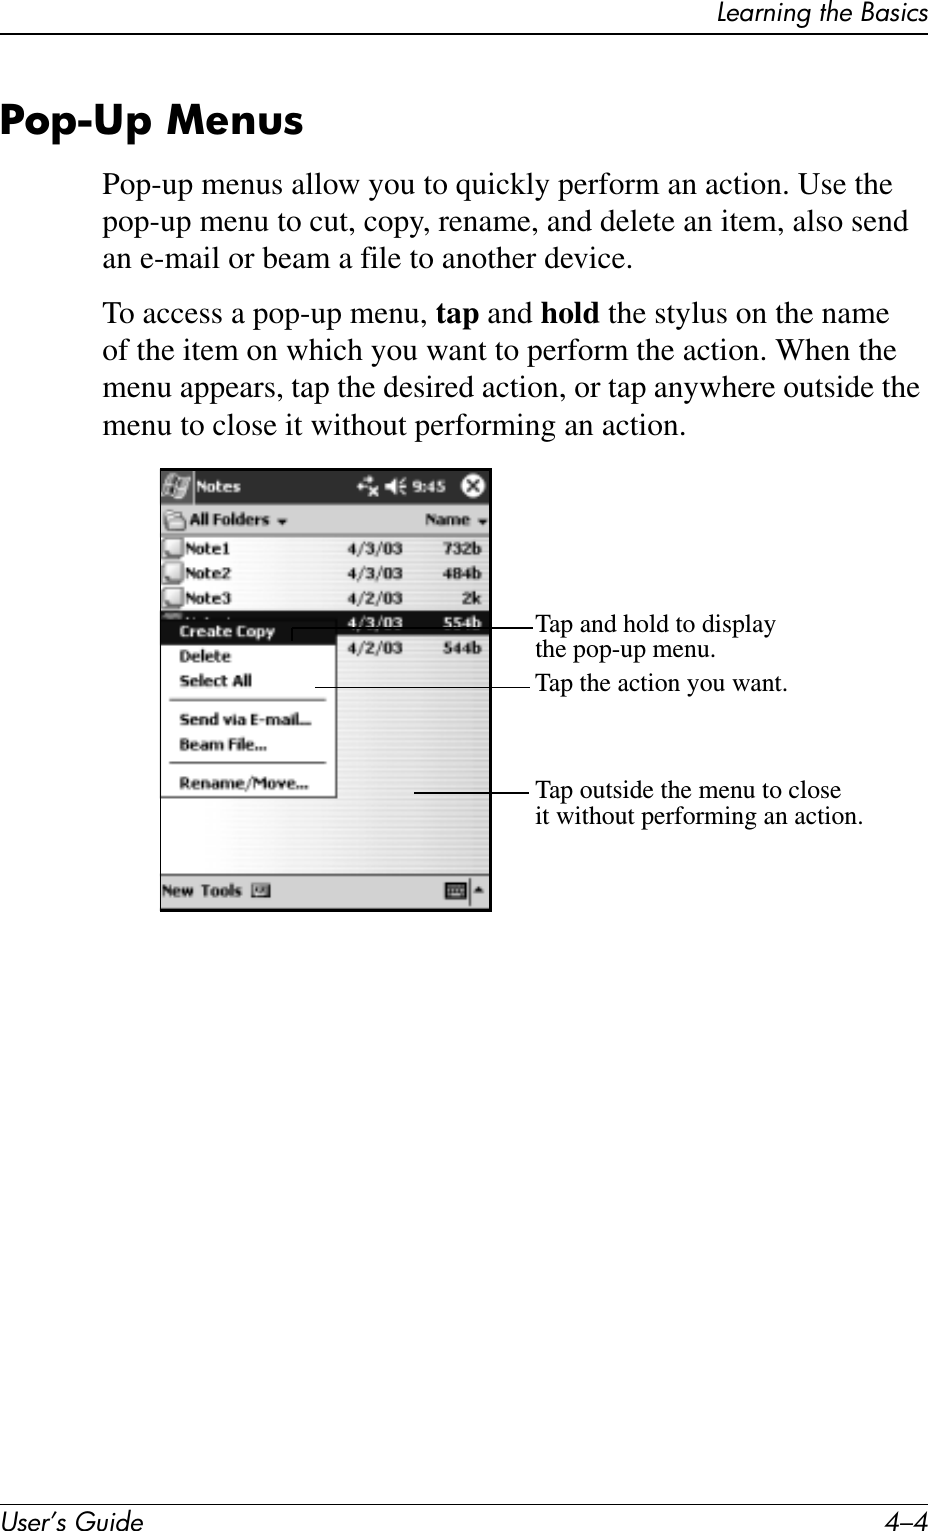 User’s Guide 4–4Learning the BasicsPop-Up MenusPop-up menus allow you to quickly perform an action. Use the pop-up menu to cut, copy, rename, and delete an item, also send an e-mail or beam a file to another device.To access a pop-up menu, tap and hold the stylus on the name of the item on which you want to perform the action. When the menu appears, tap the desired action, or tap anywhere outside the menu to close it without performing an action.Tap and hold to displaythe pop-up menu.Tap the action you want.Tap outside the menu to closeit without performing an action.